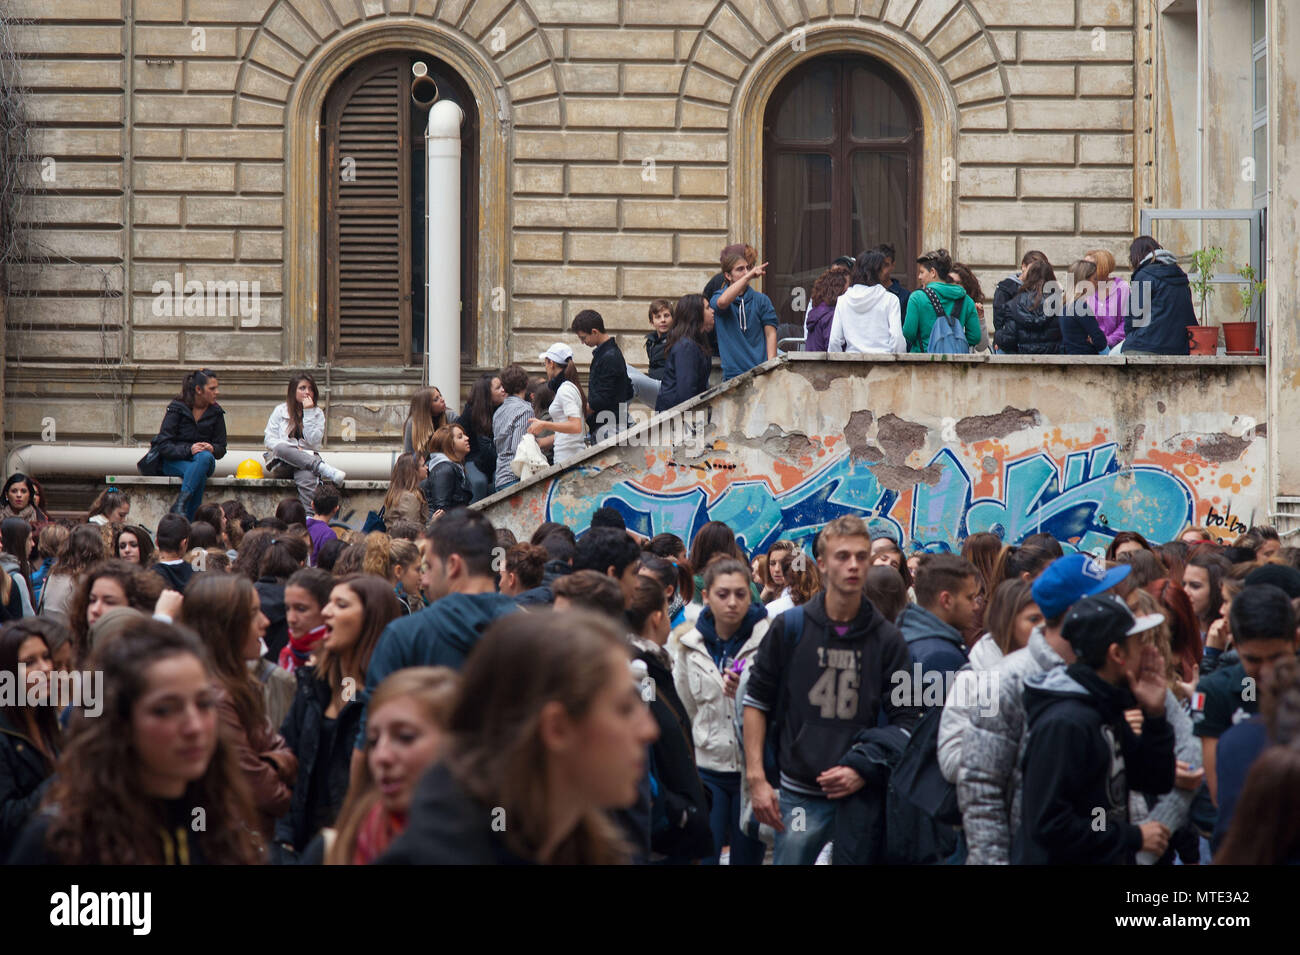 Rome. "Machiavelli" high school occupied by students who protest against government cuts on education. Italy. Stock Photo